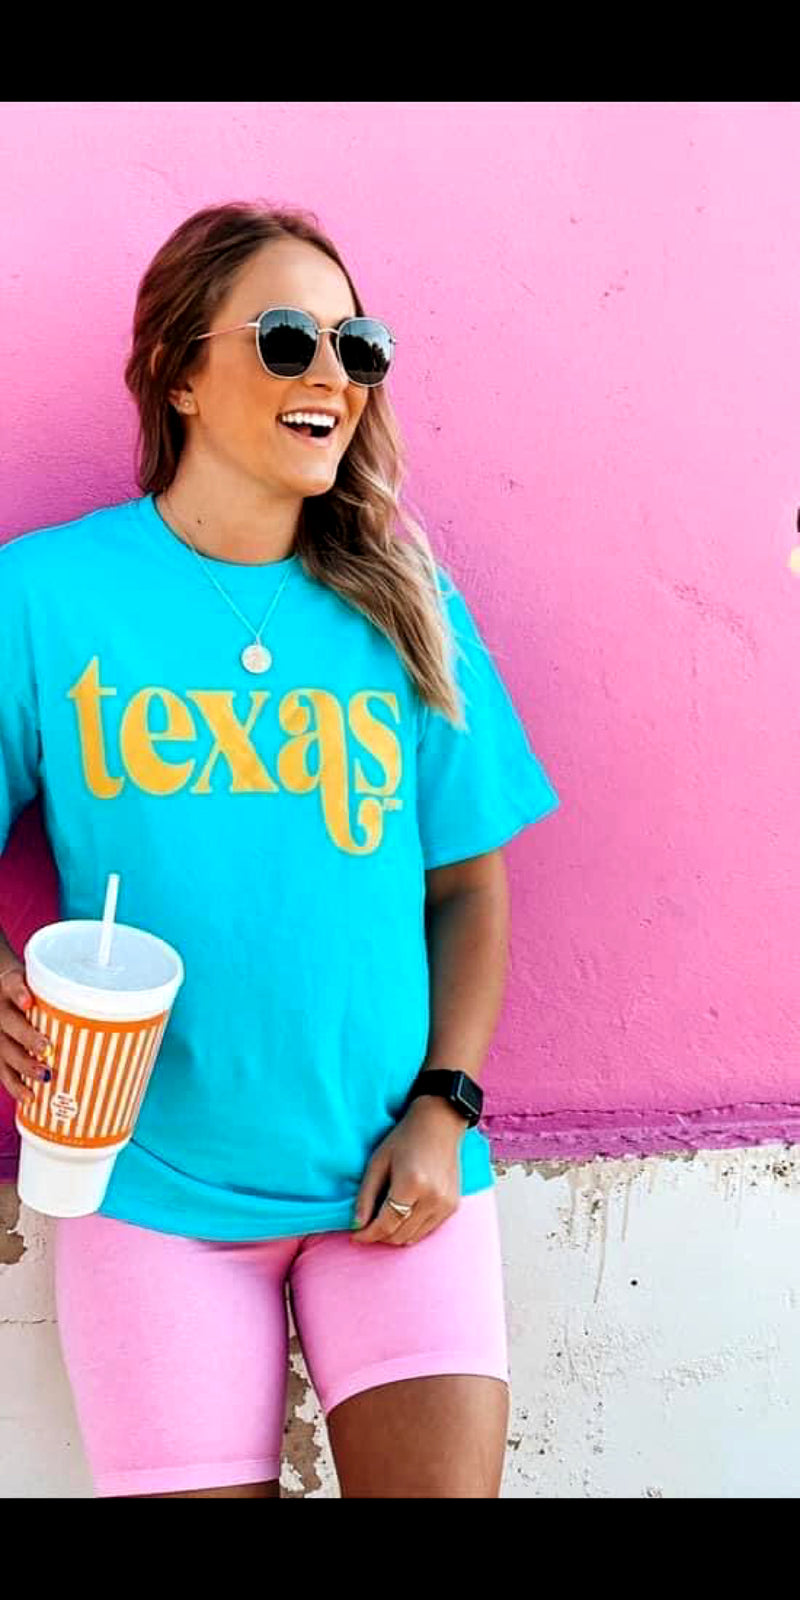 TEXAS on Turquoise Top - Also in Plus Size